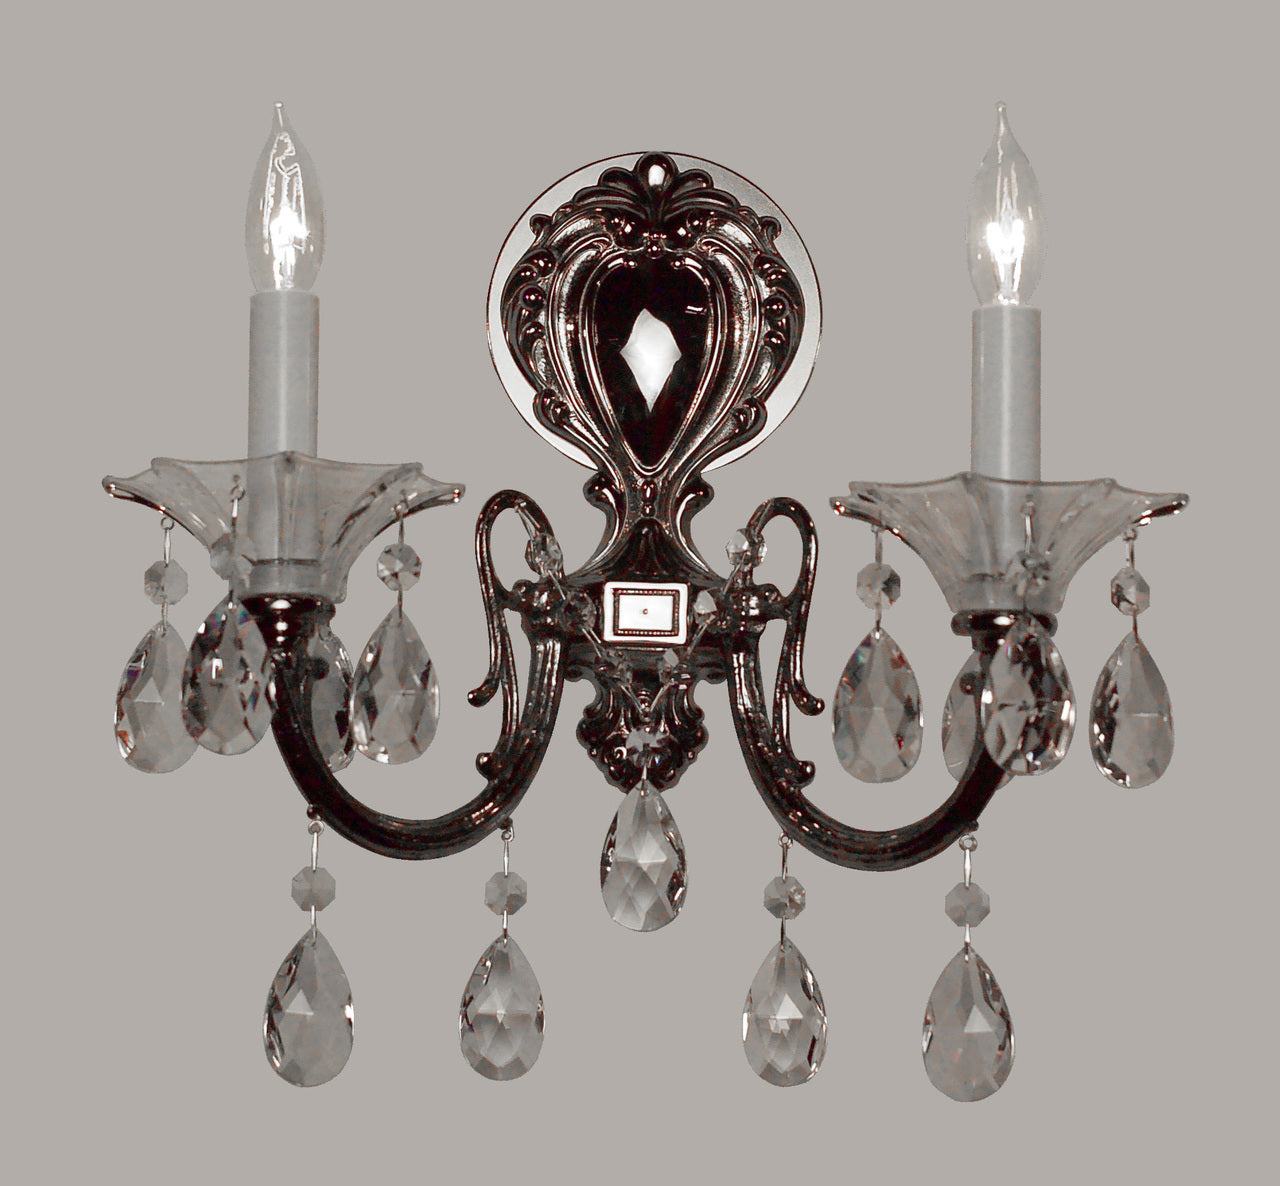 Classic Lighting 57052 CHP SGT Via Lombardi Crystal Wall Sconce in Champagne Pearl (Imported from Spain)